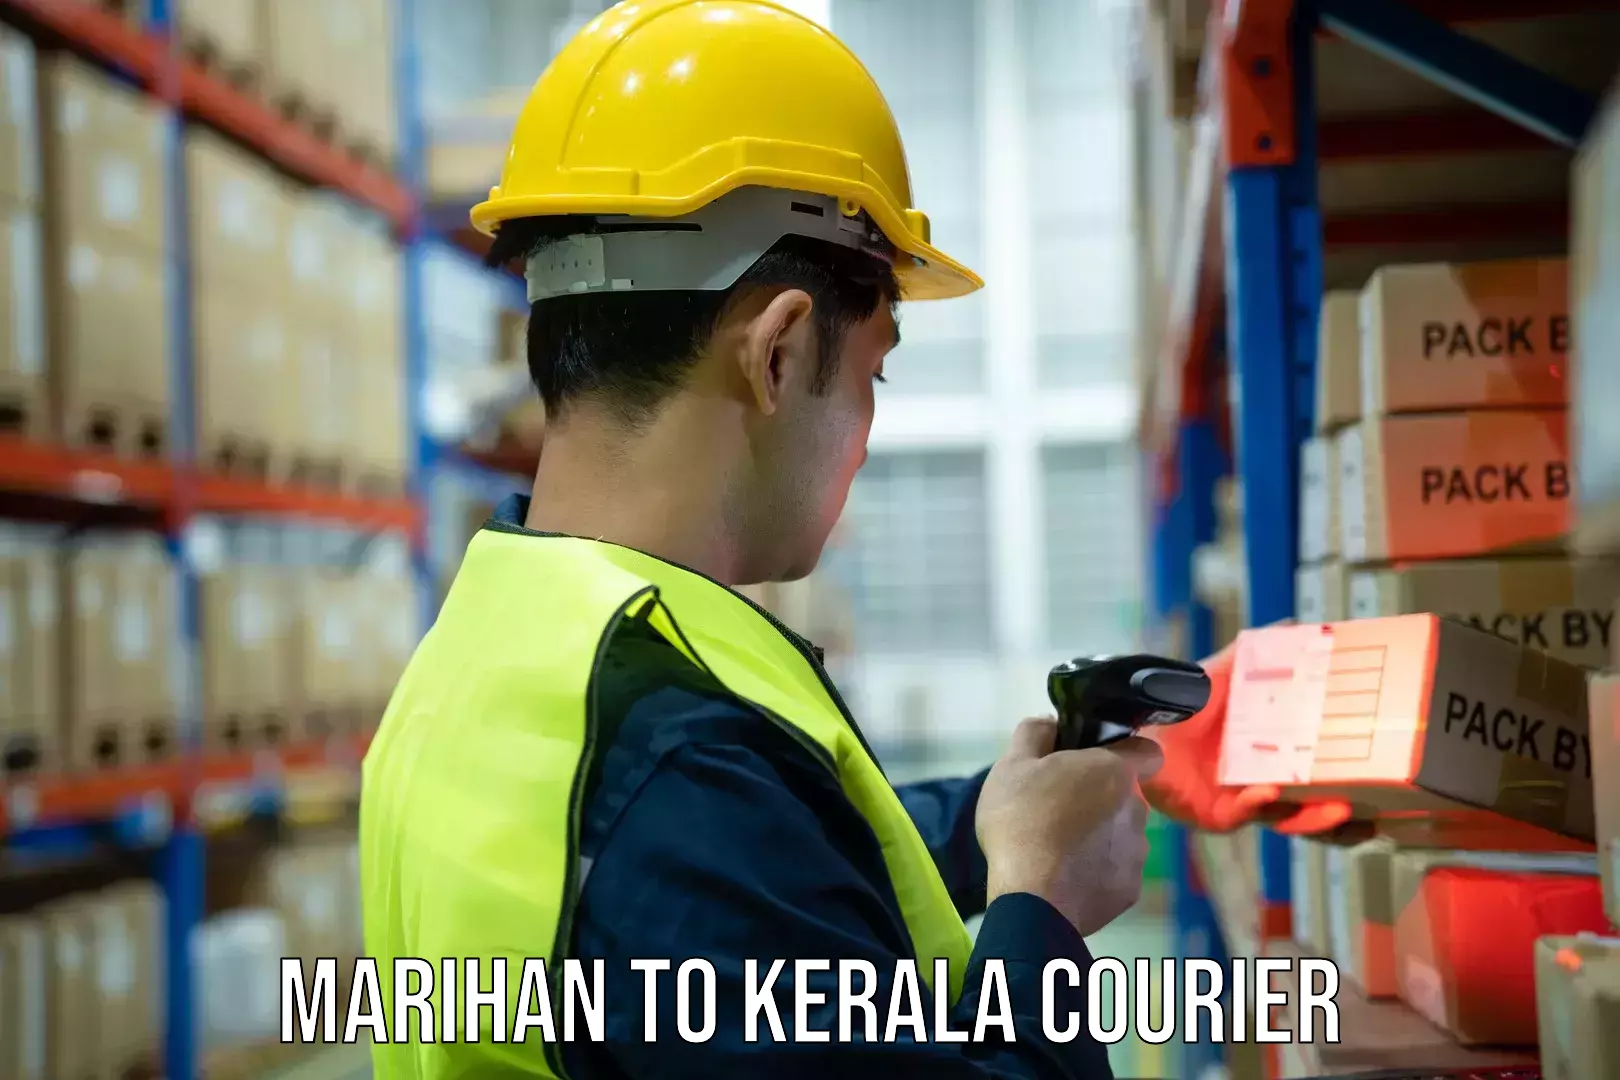 User-friendly delivery service Marihan to Kerala